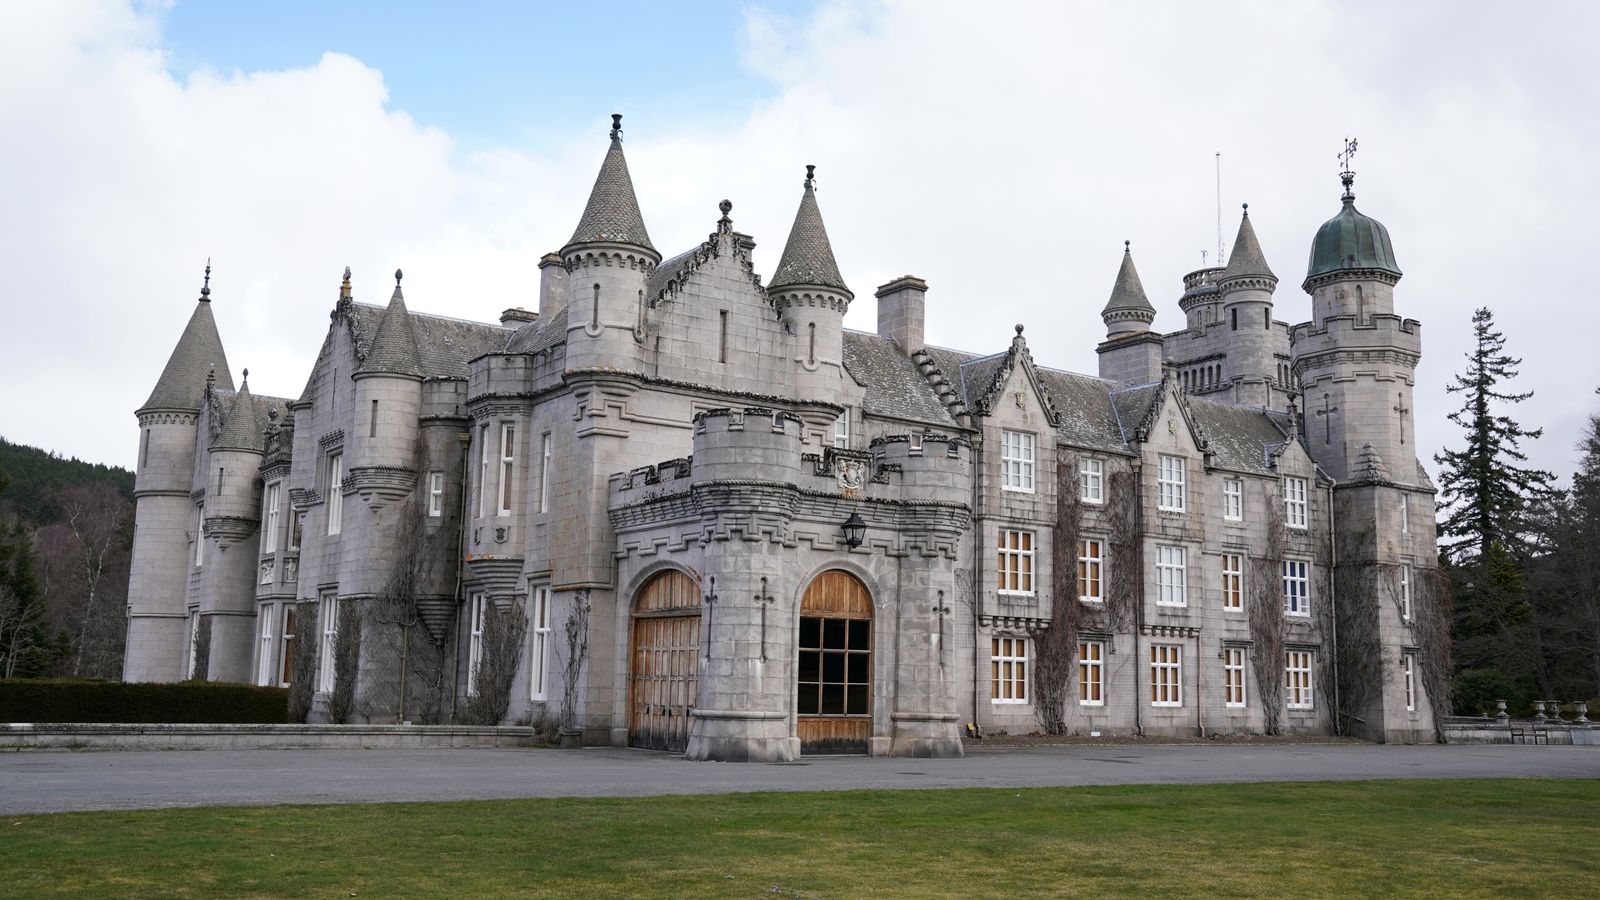 King Charles opens Balmoral Castle to public for first time - but tickets aren't cheap | UK News